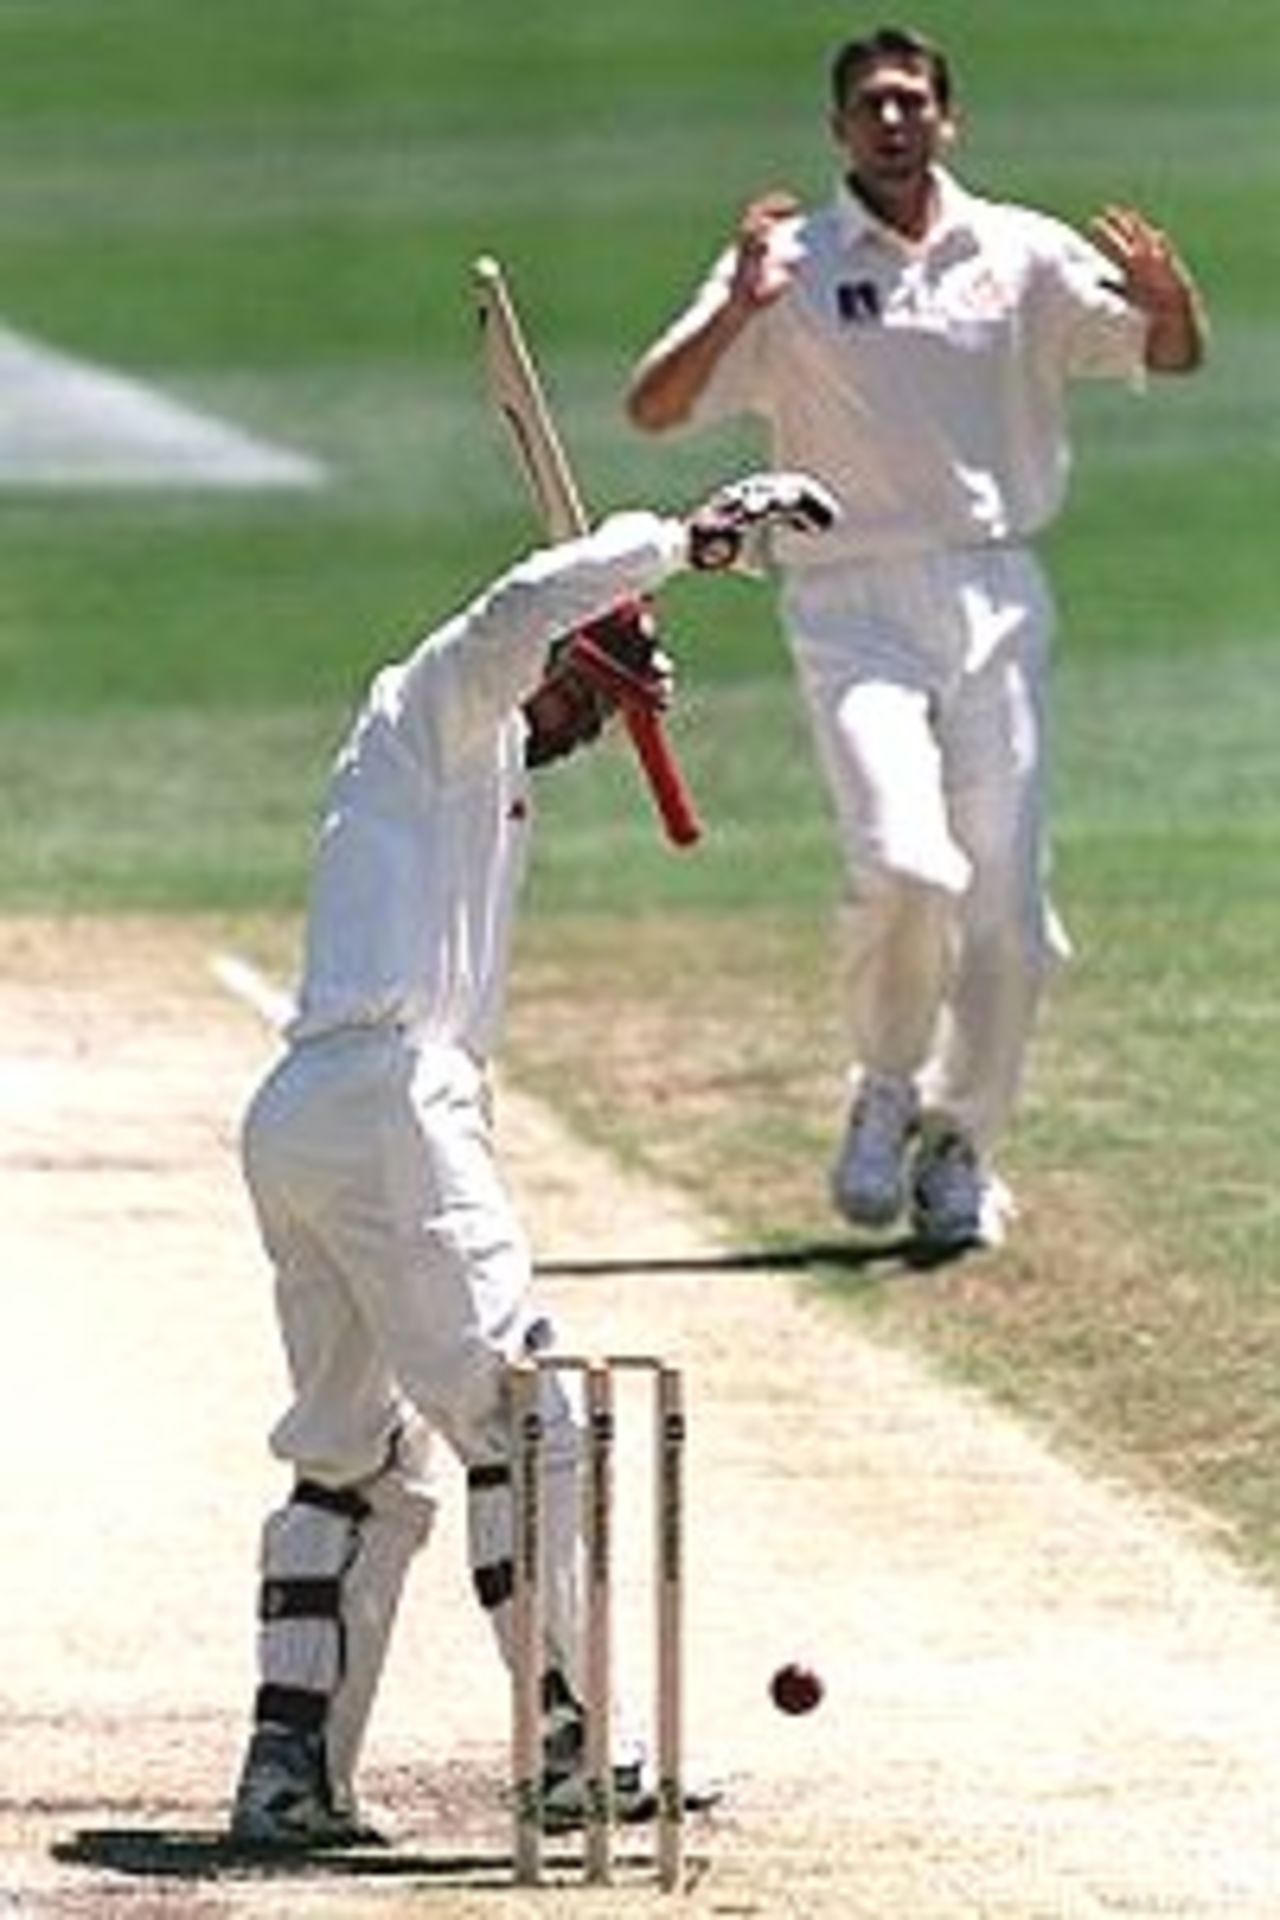 25 Nov 2000: Jimmy Adams of West Indies fends off a bouncer from Glenn McGrath of Australia during the third day of the First Test match between Australia and West Indies at The Gabba cricket ground in Brisbane, Australia.